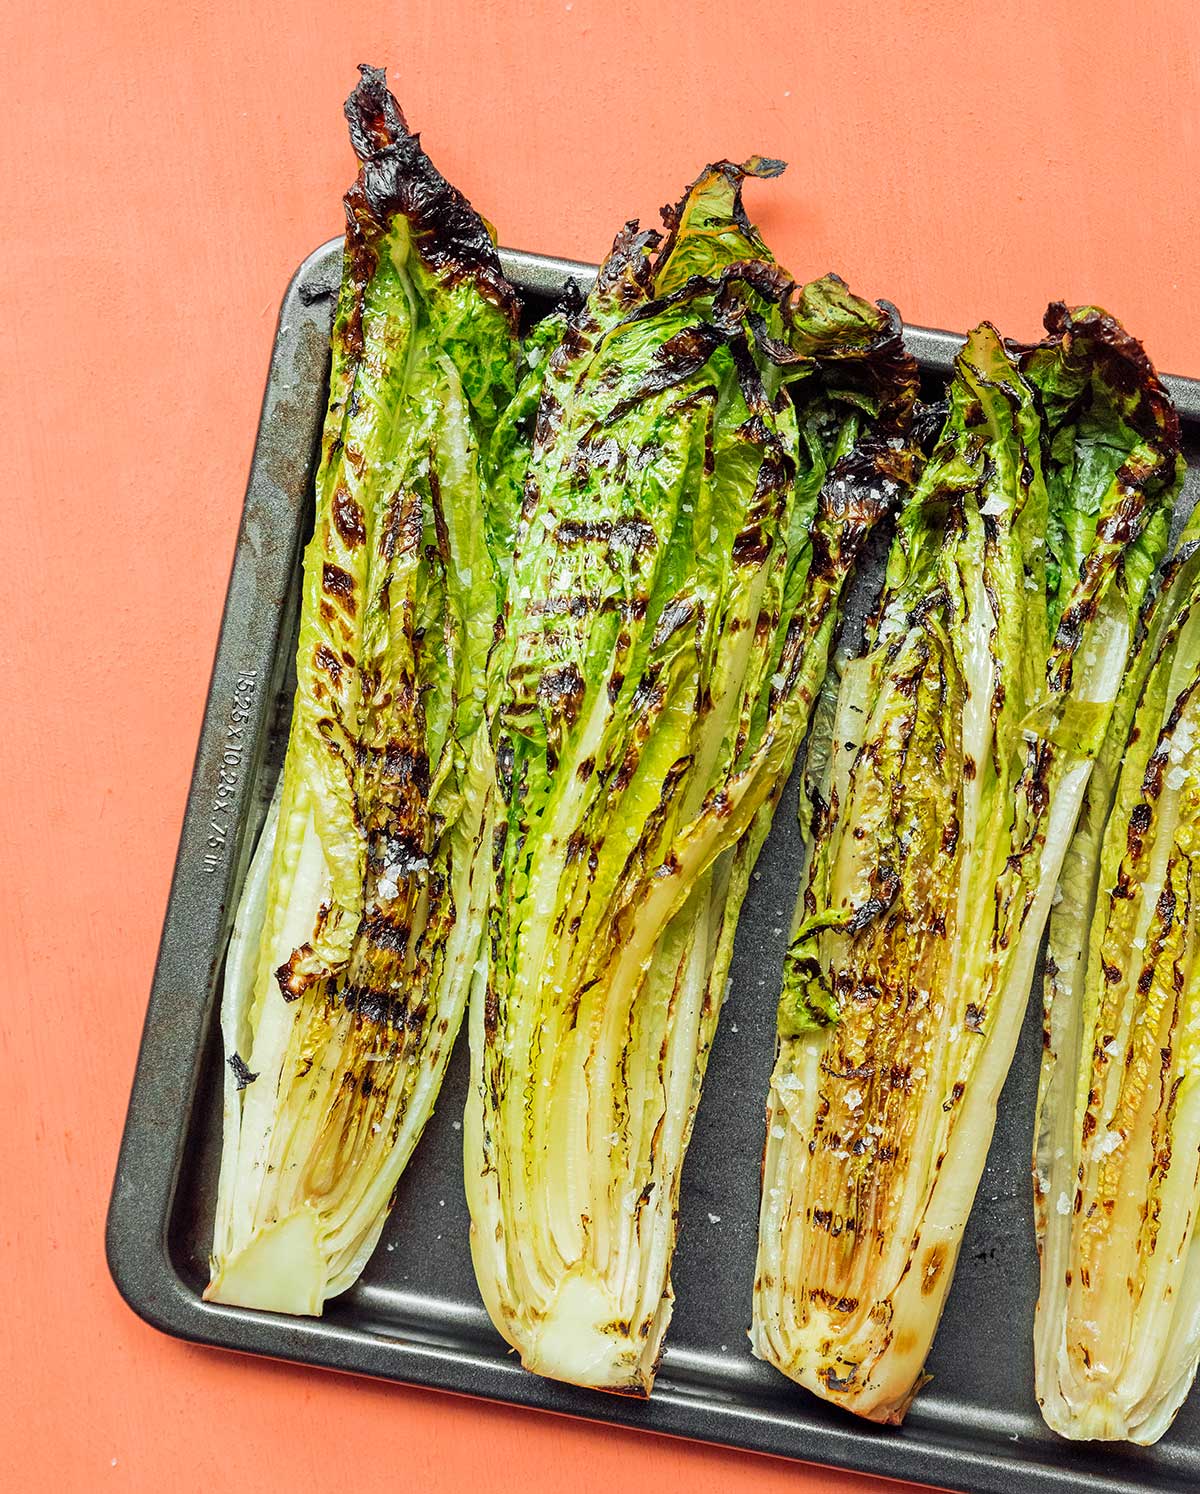 Four freshly grilled romaine heart halves lined up on a baking tray